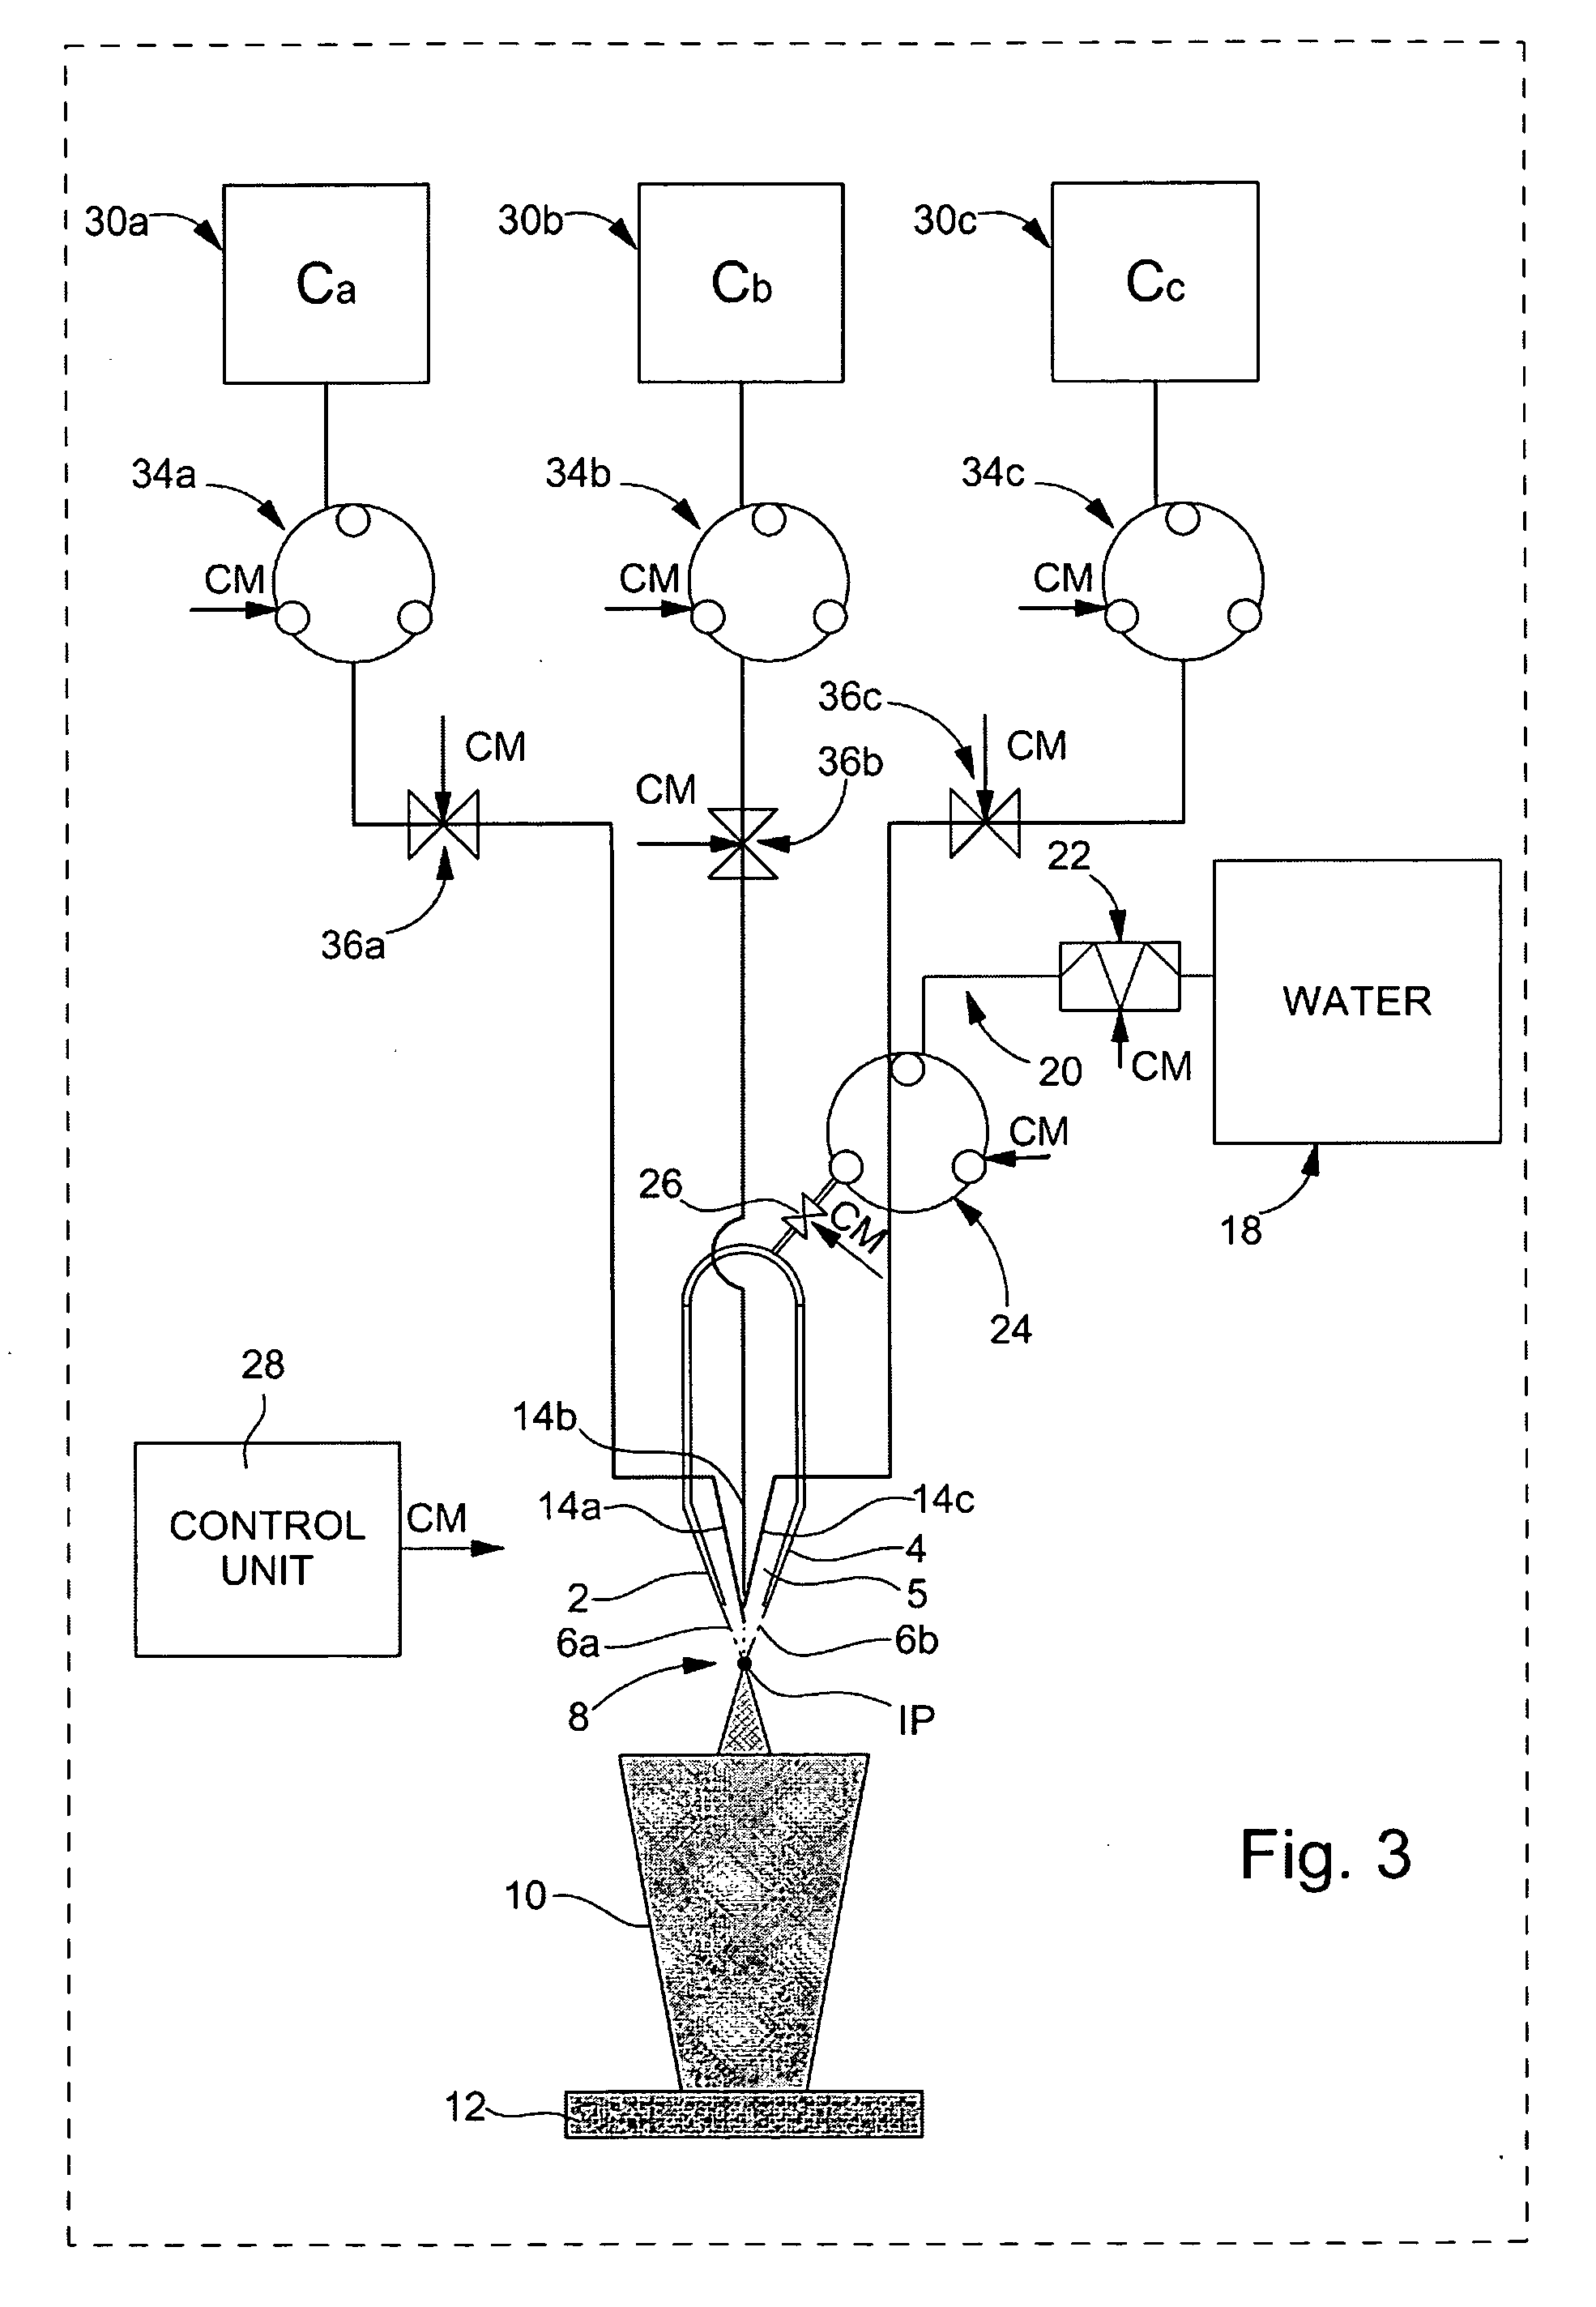 Method and system for dispensing hot and cold beverages from liquid concentrates